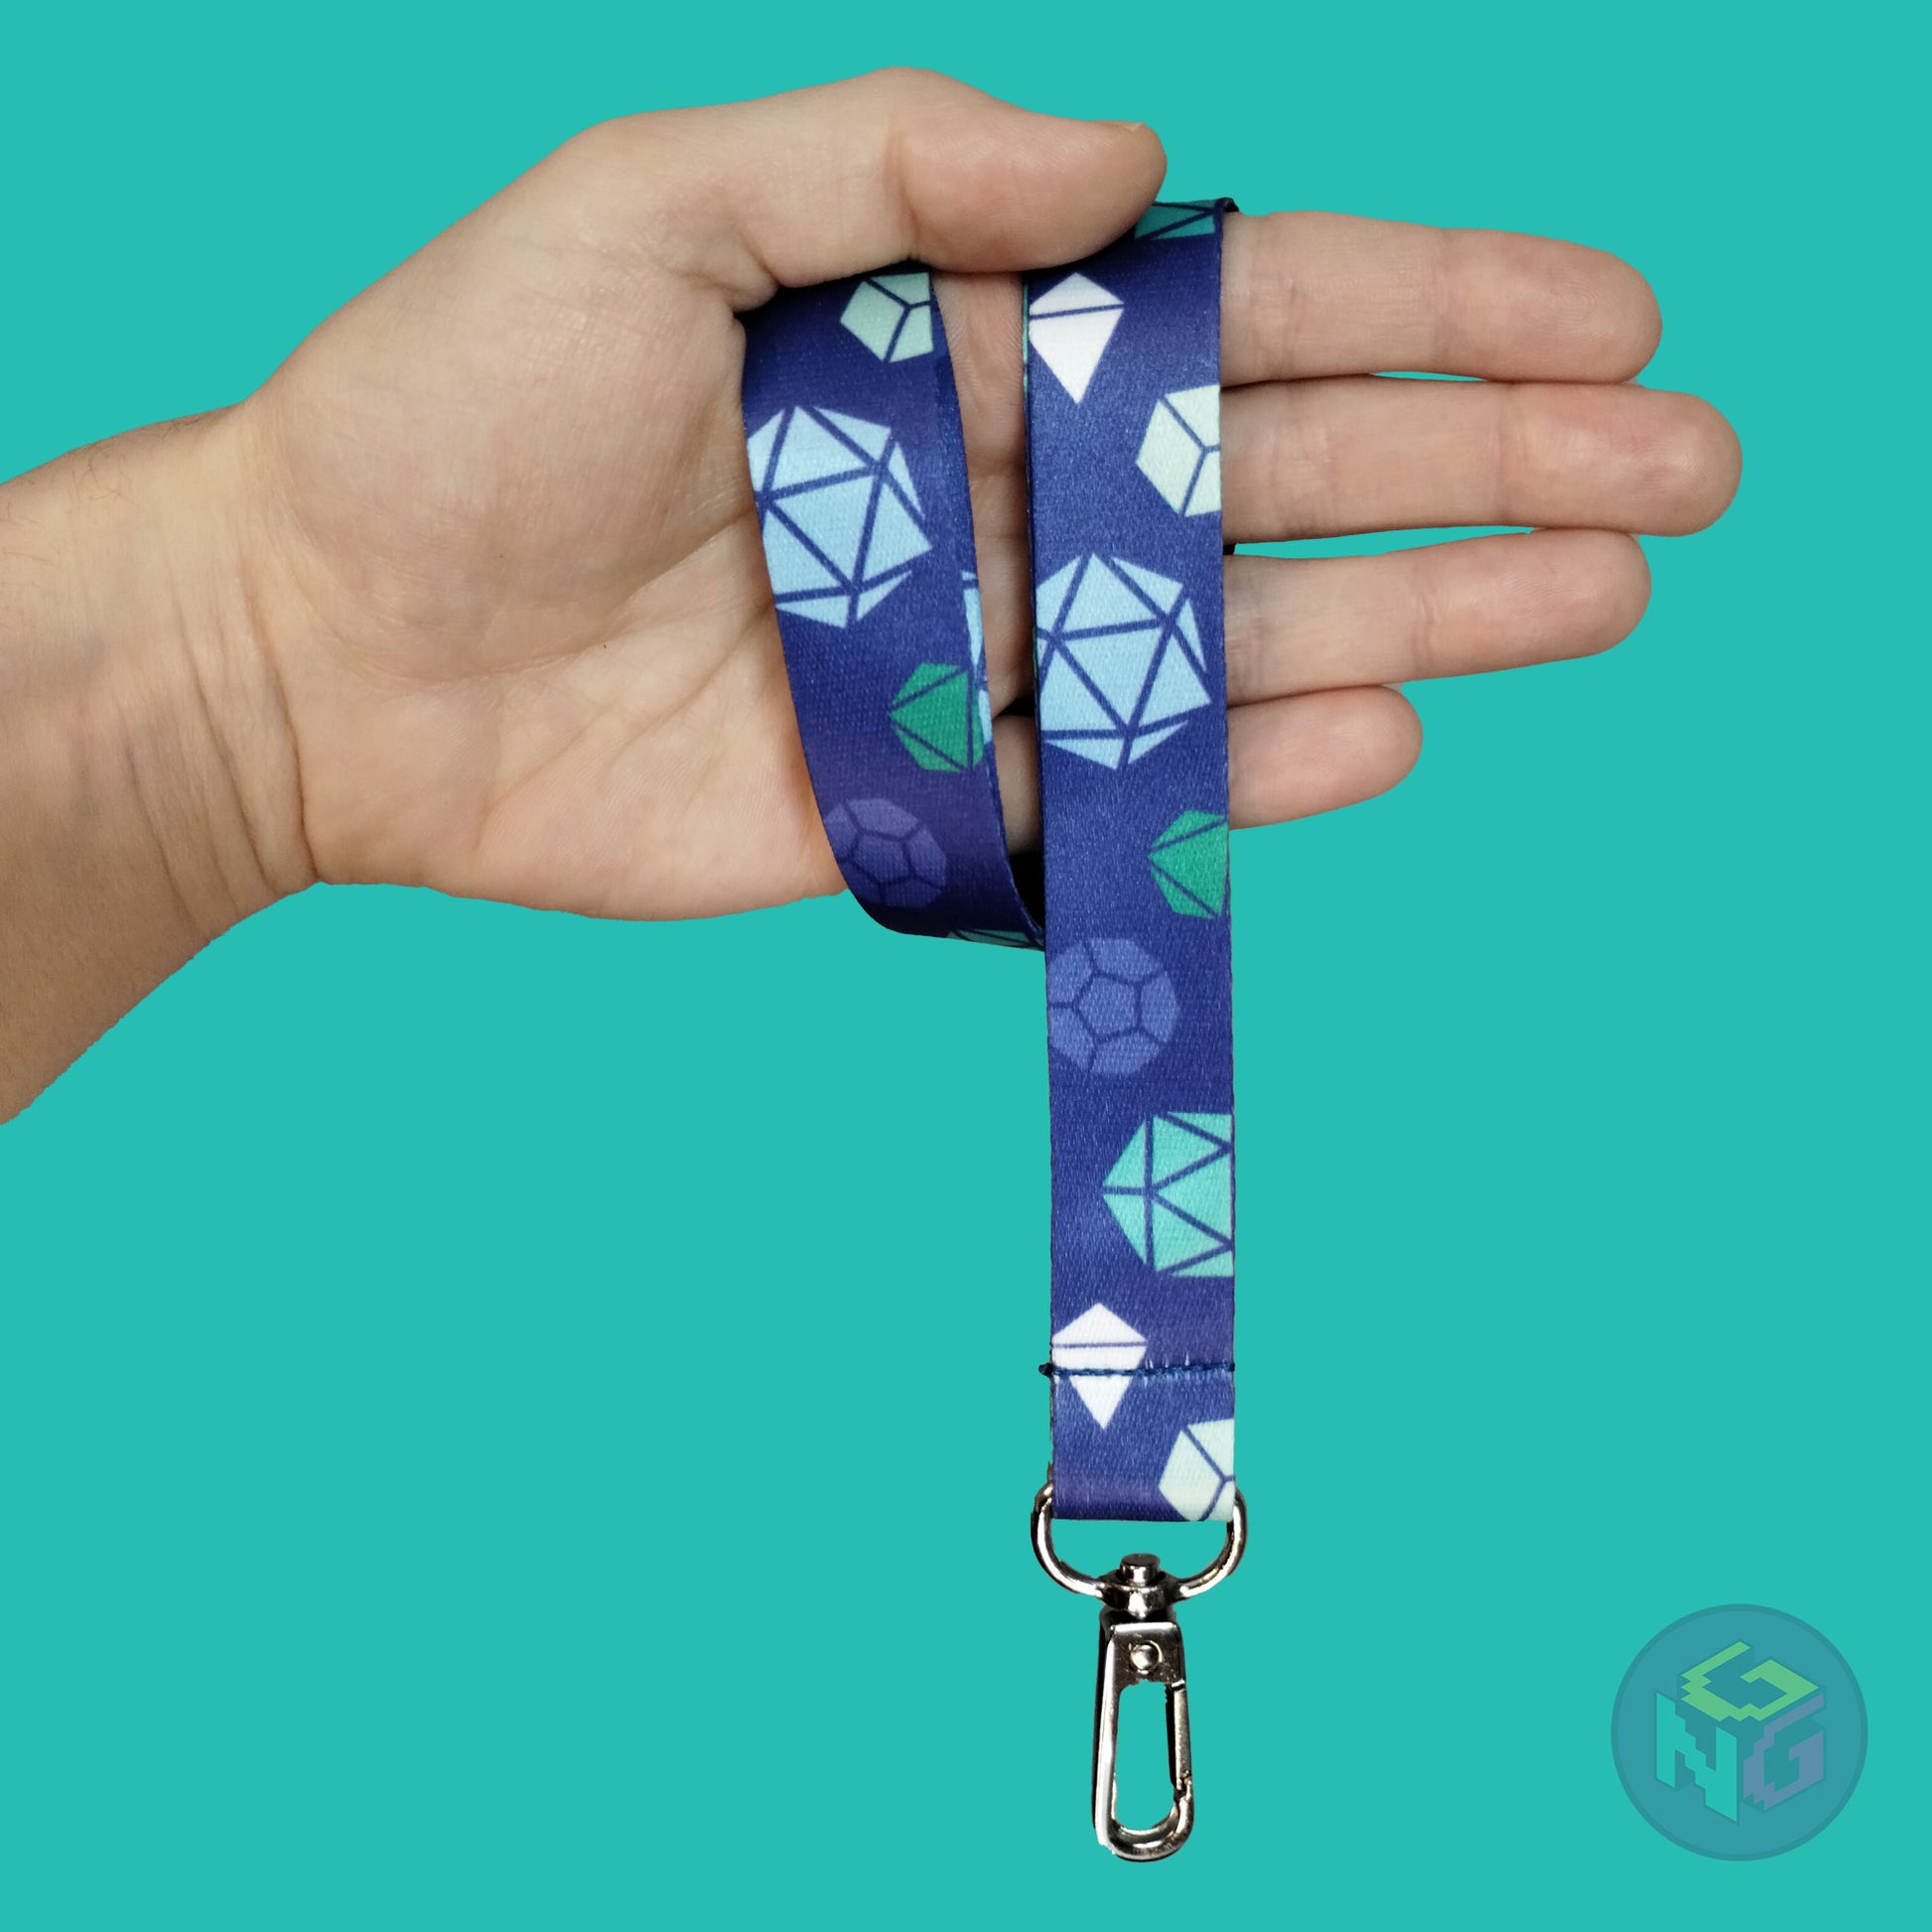 blue gay mlm dice lanyard wrapped around a hand with the lobster clasp dangling against a turquoise background